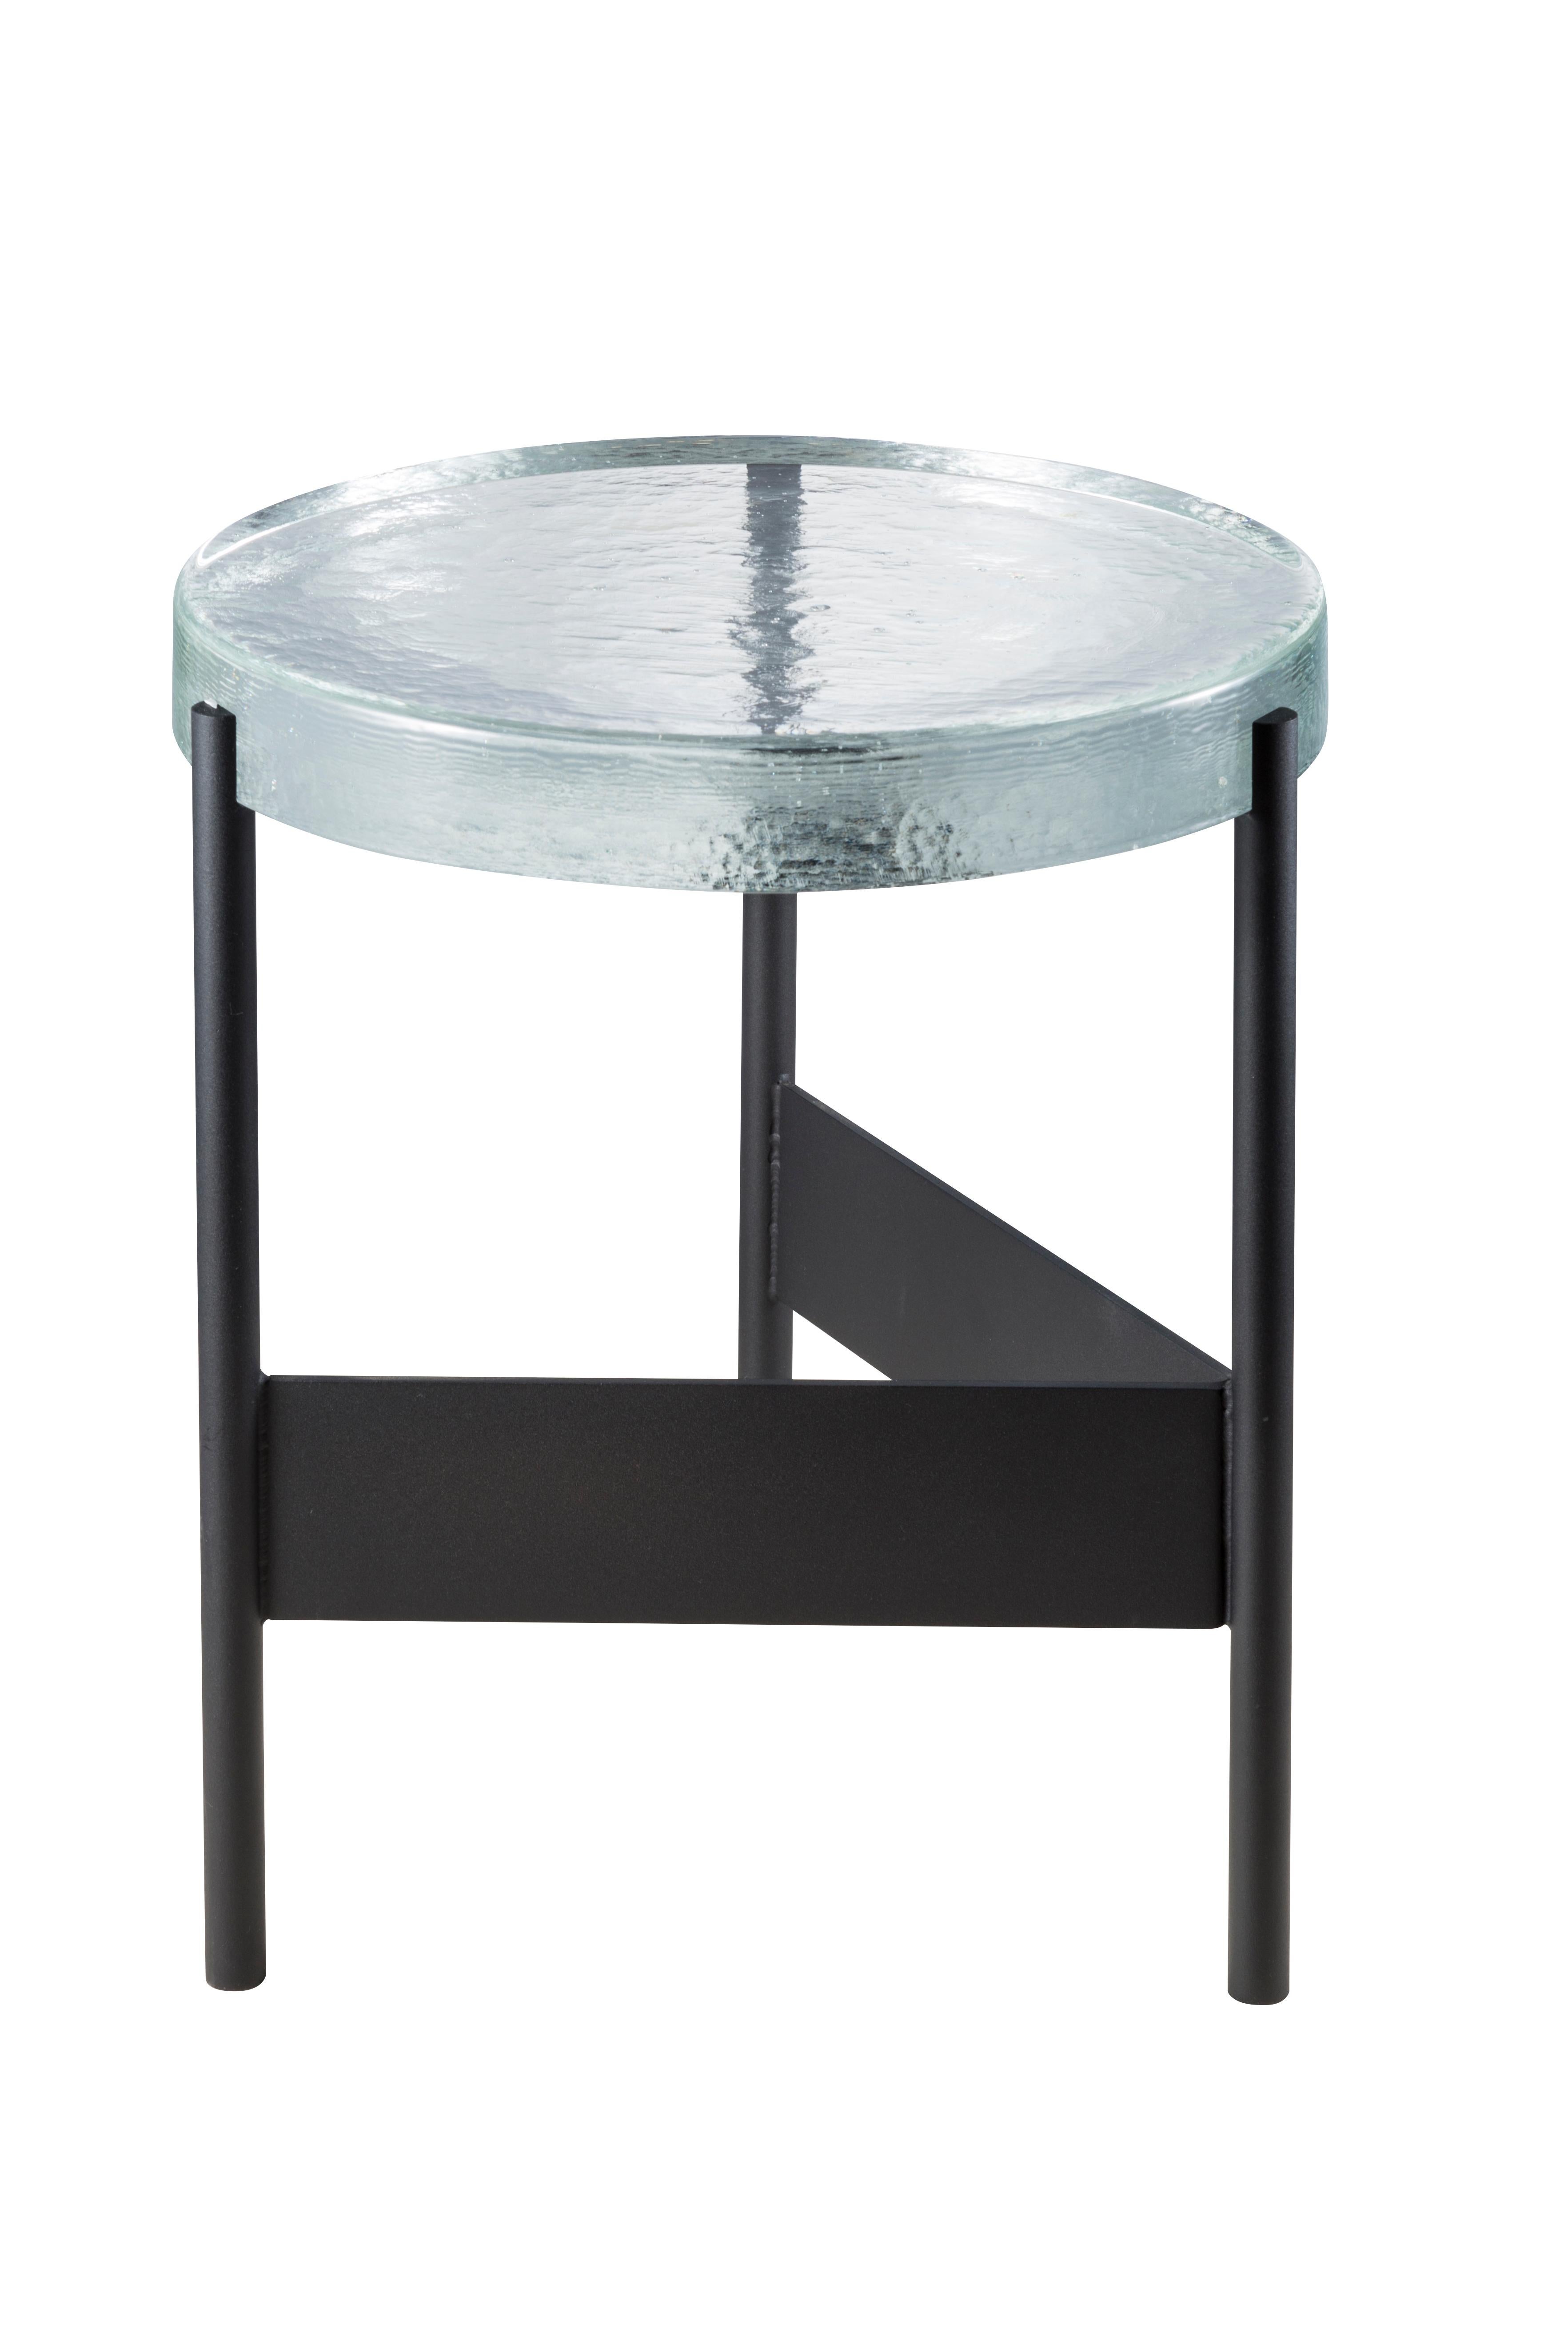 Alwa two transparent black side table by Pulpo
Dimensions: D38 x H44 cm
Materials: casted glass; powder coated steel 

Also available in different finishes.

Normally, glass is regarded as being lightweight with sharp edges. In contrast, Sebastian